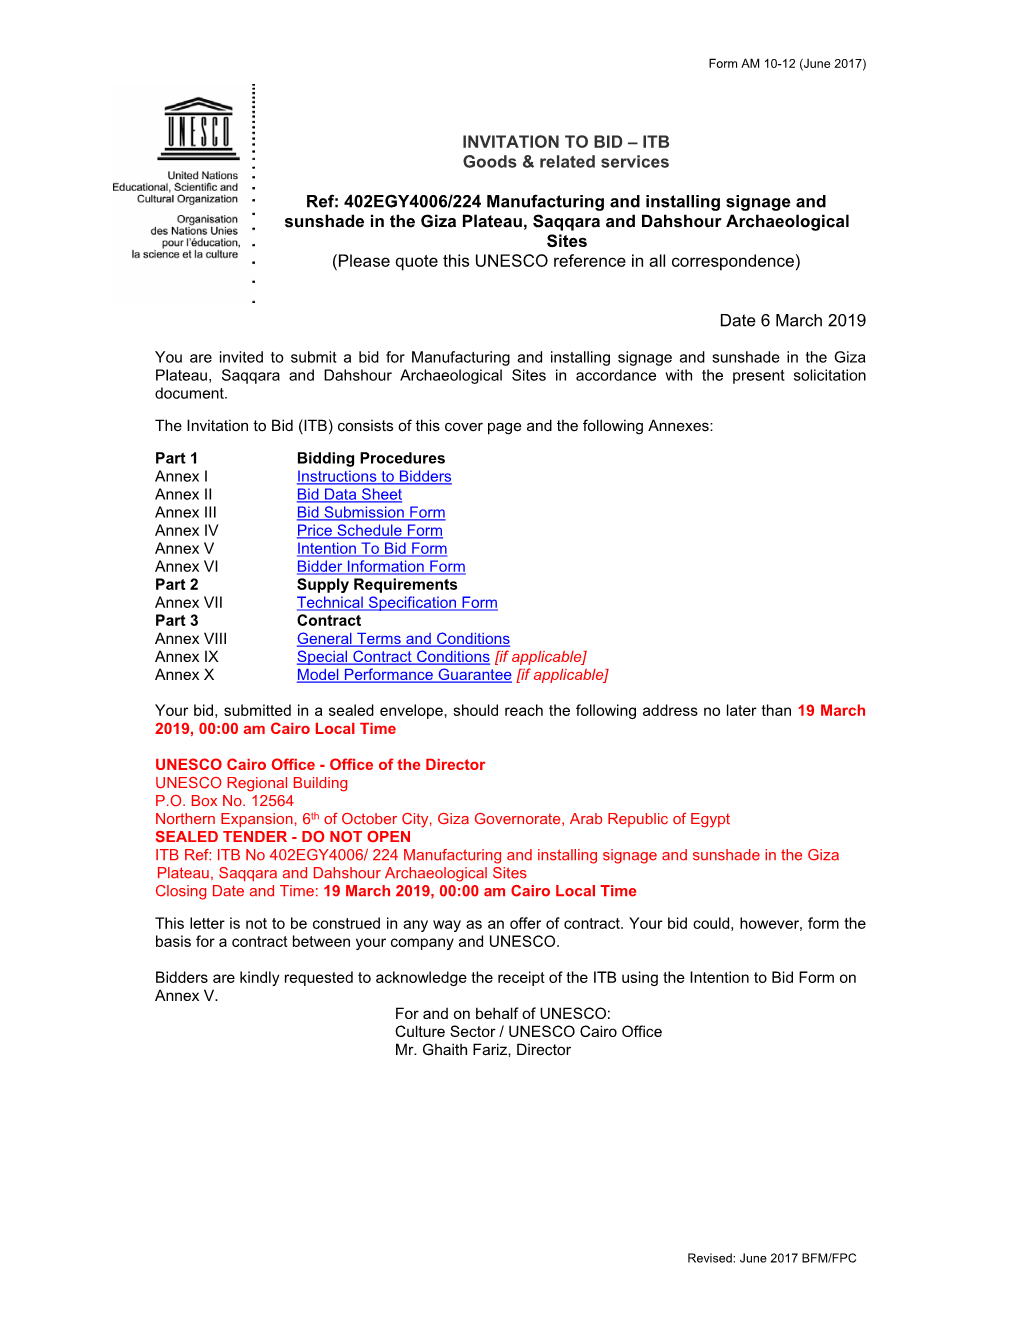 INVITATION to BID – ITB Goods & Related Services